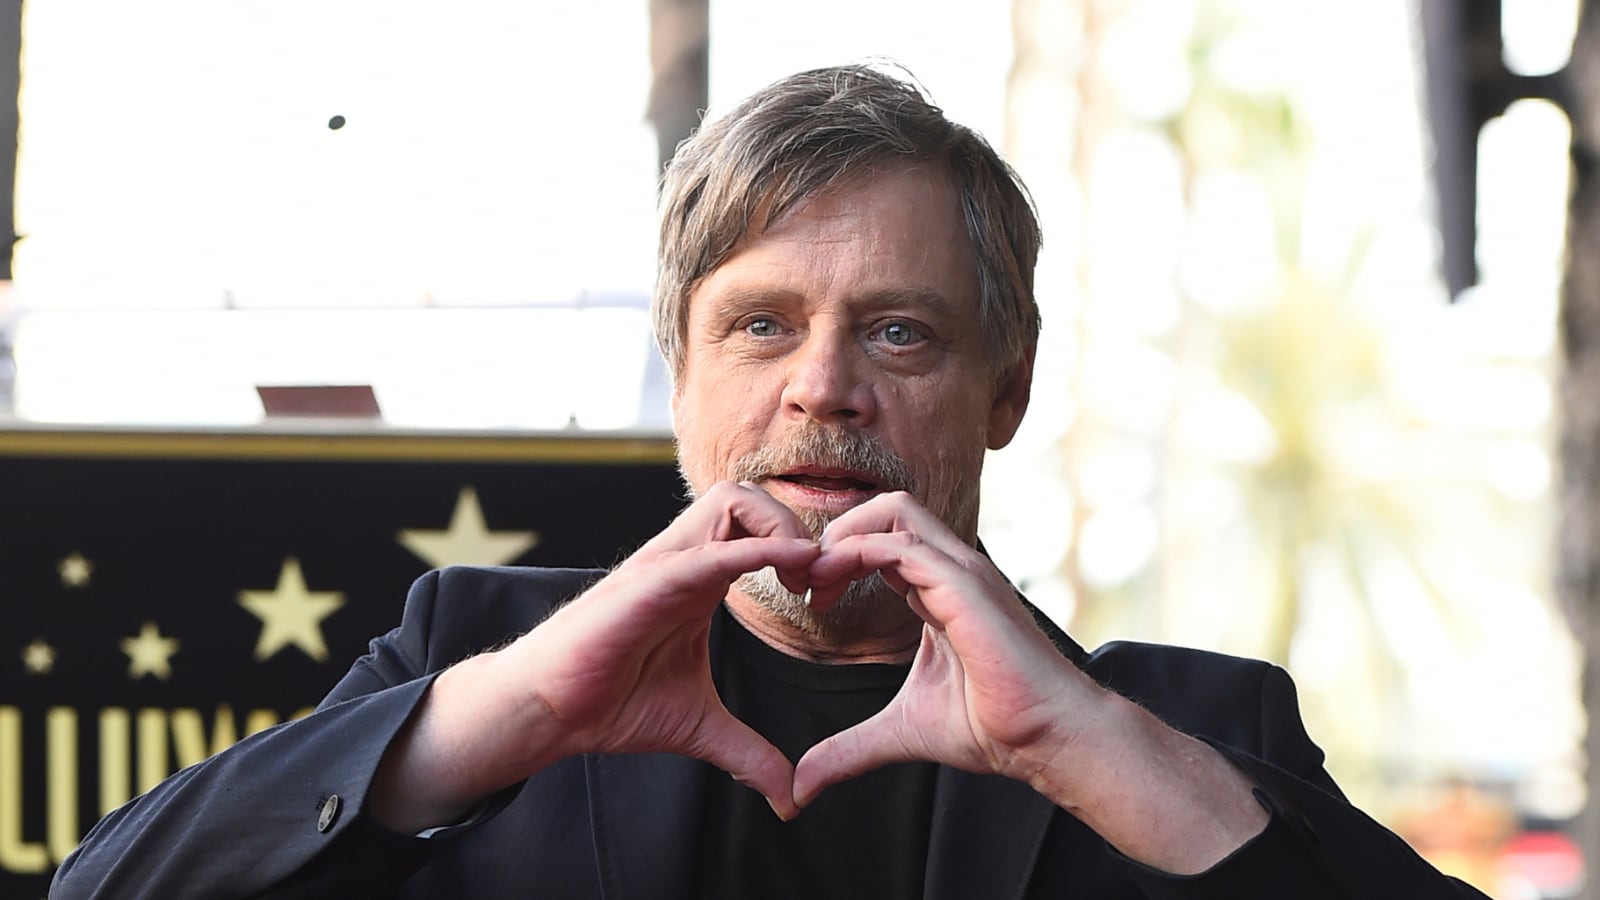 Star Wars' Actor Mark Hamill to Receive Walk of Fame Star